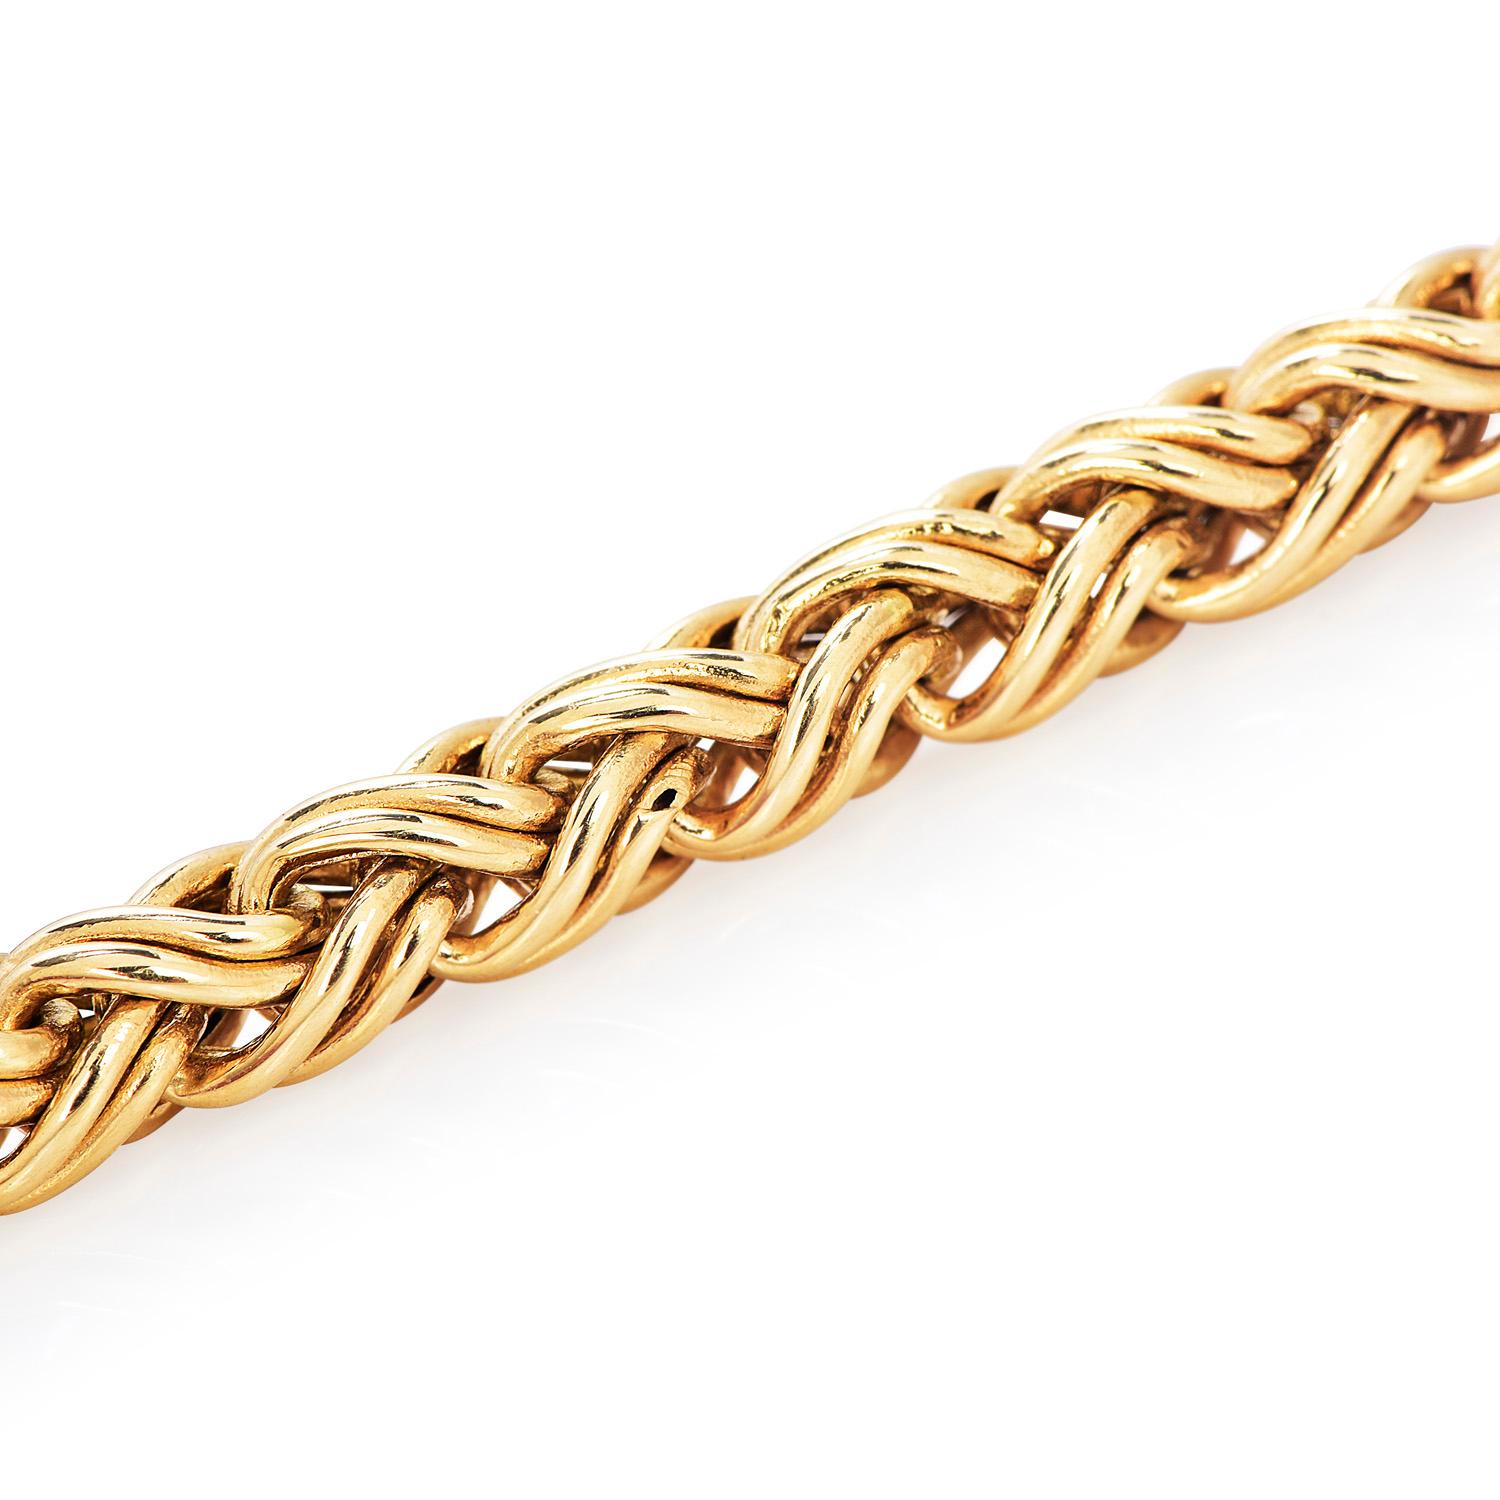 Minimalistic Tiffany & Co. 14K Gold Designer Braided Links Bracelet is the perfect daily complement to any ensemble

Precisely crafted in solid 14K yellow gold with an approximate total weight of 10.1 grams.

This whole piece’s length is 7.5” x 4 mm